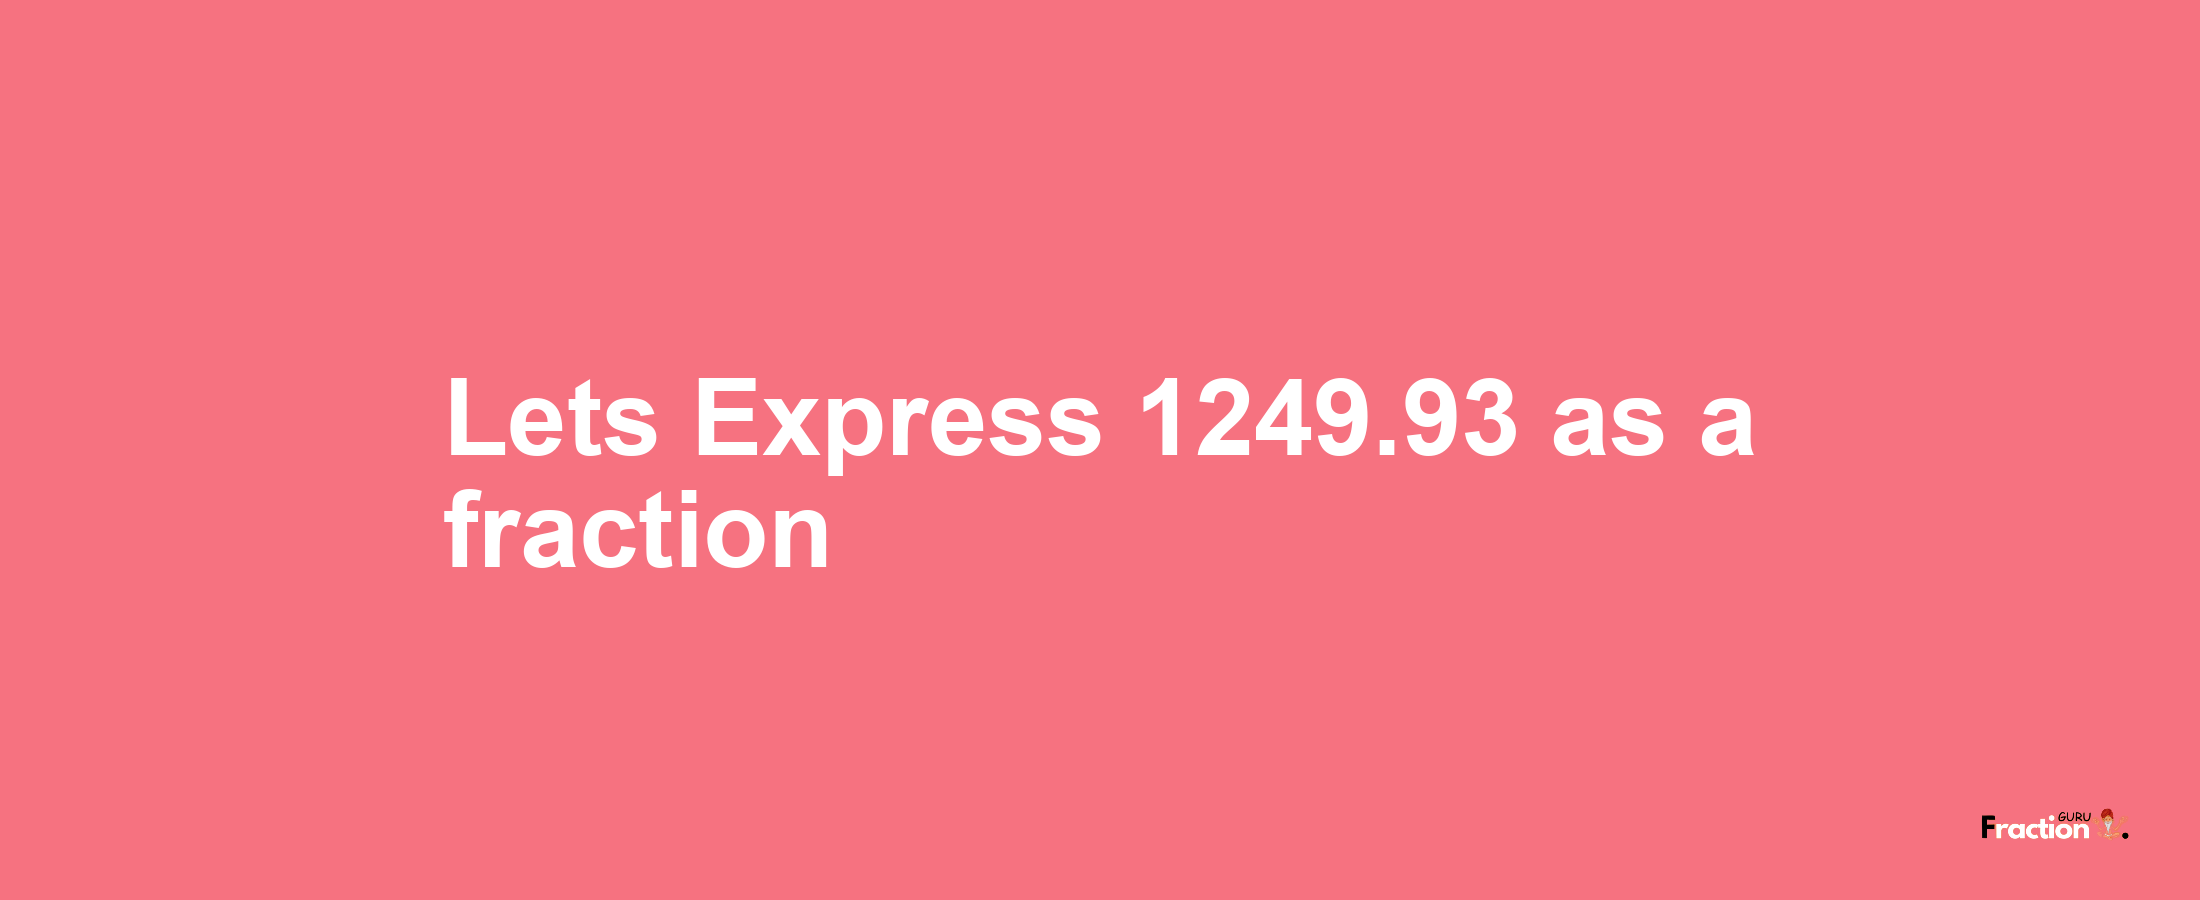 Lets Express 1249.93 as afraction